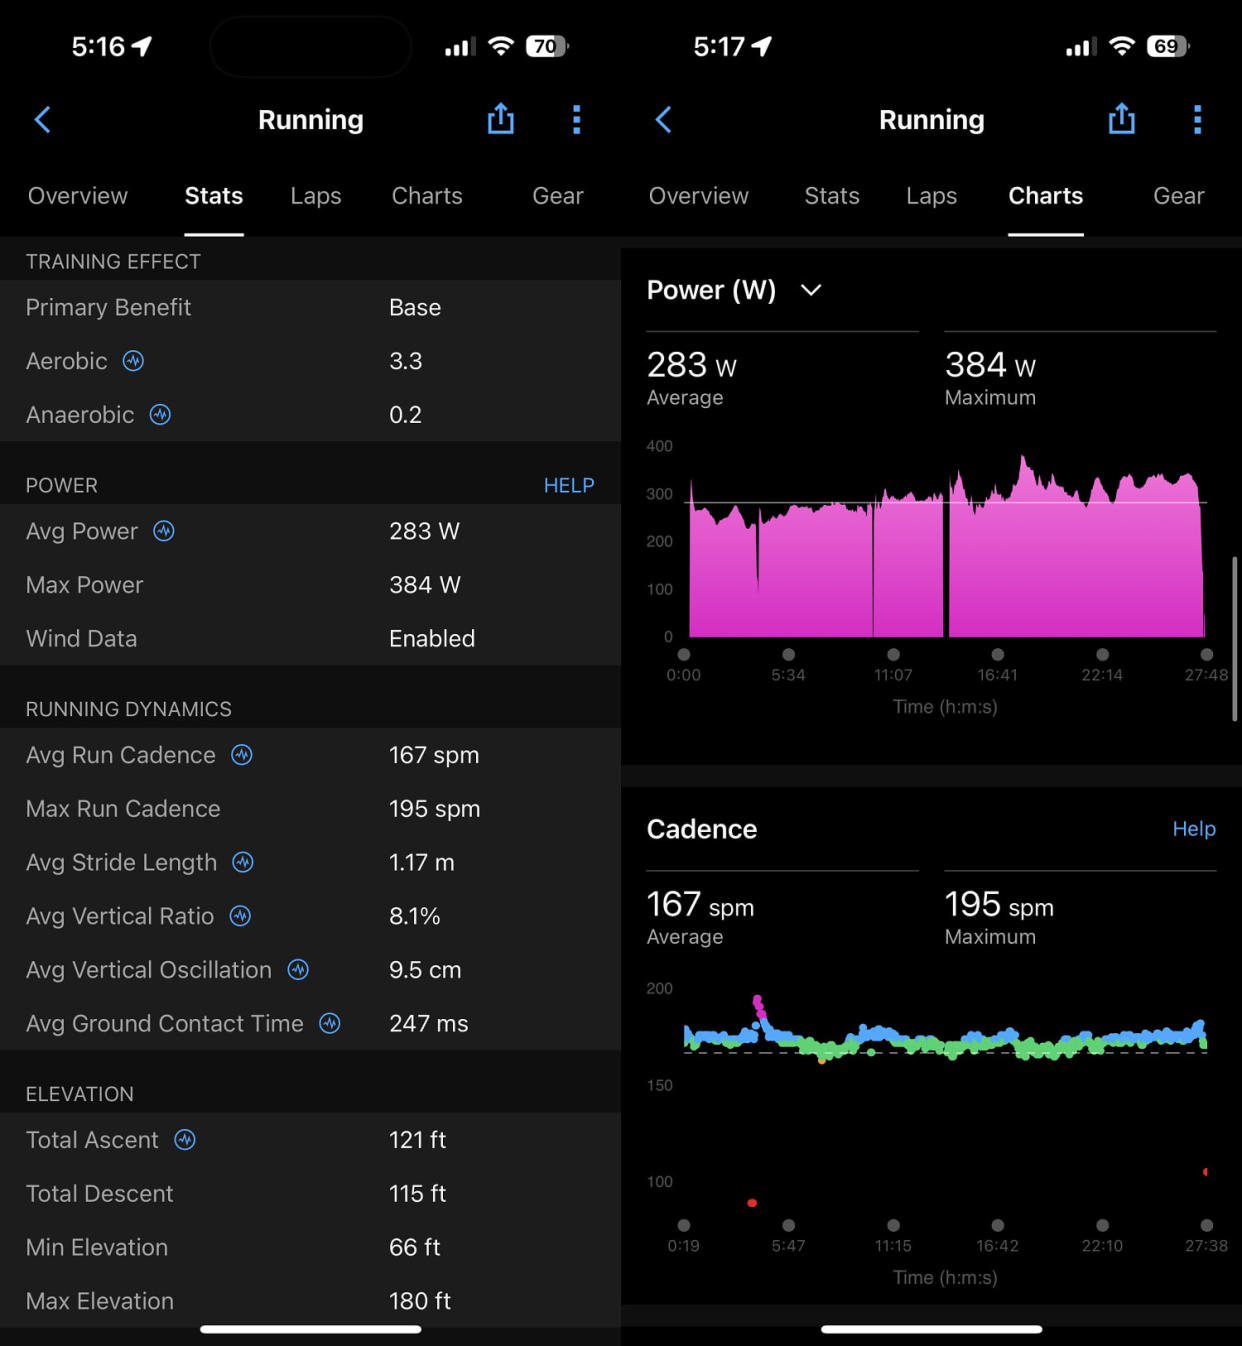 Two images of different Garmin running stats, show metrics like training effect, power, and cadence in lists and graphs. (Courtesy Harry Rabinowitz)